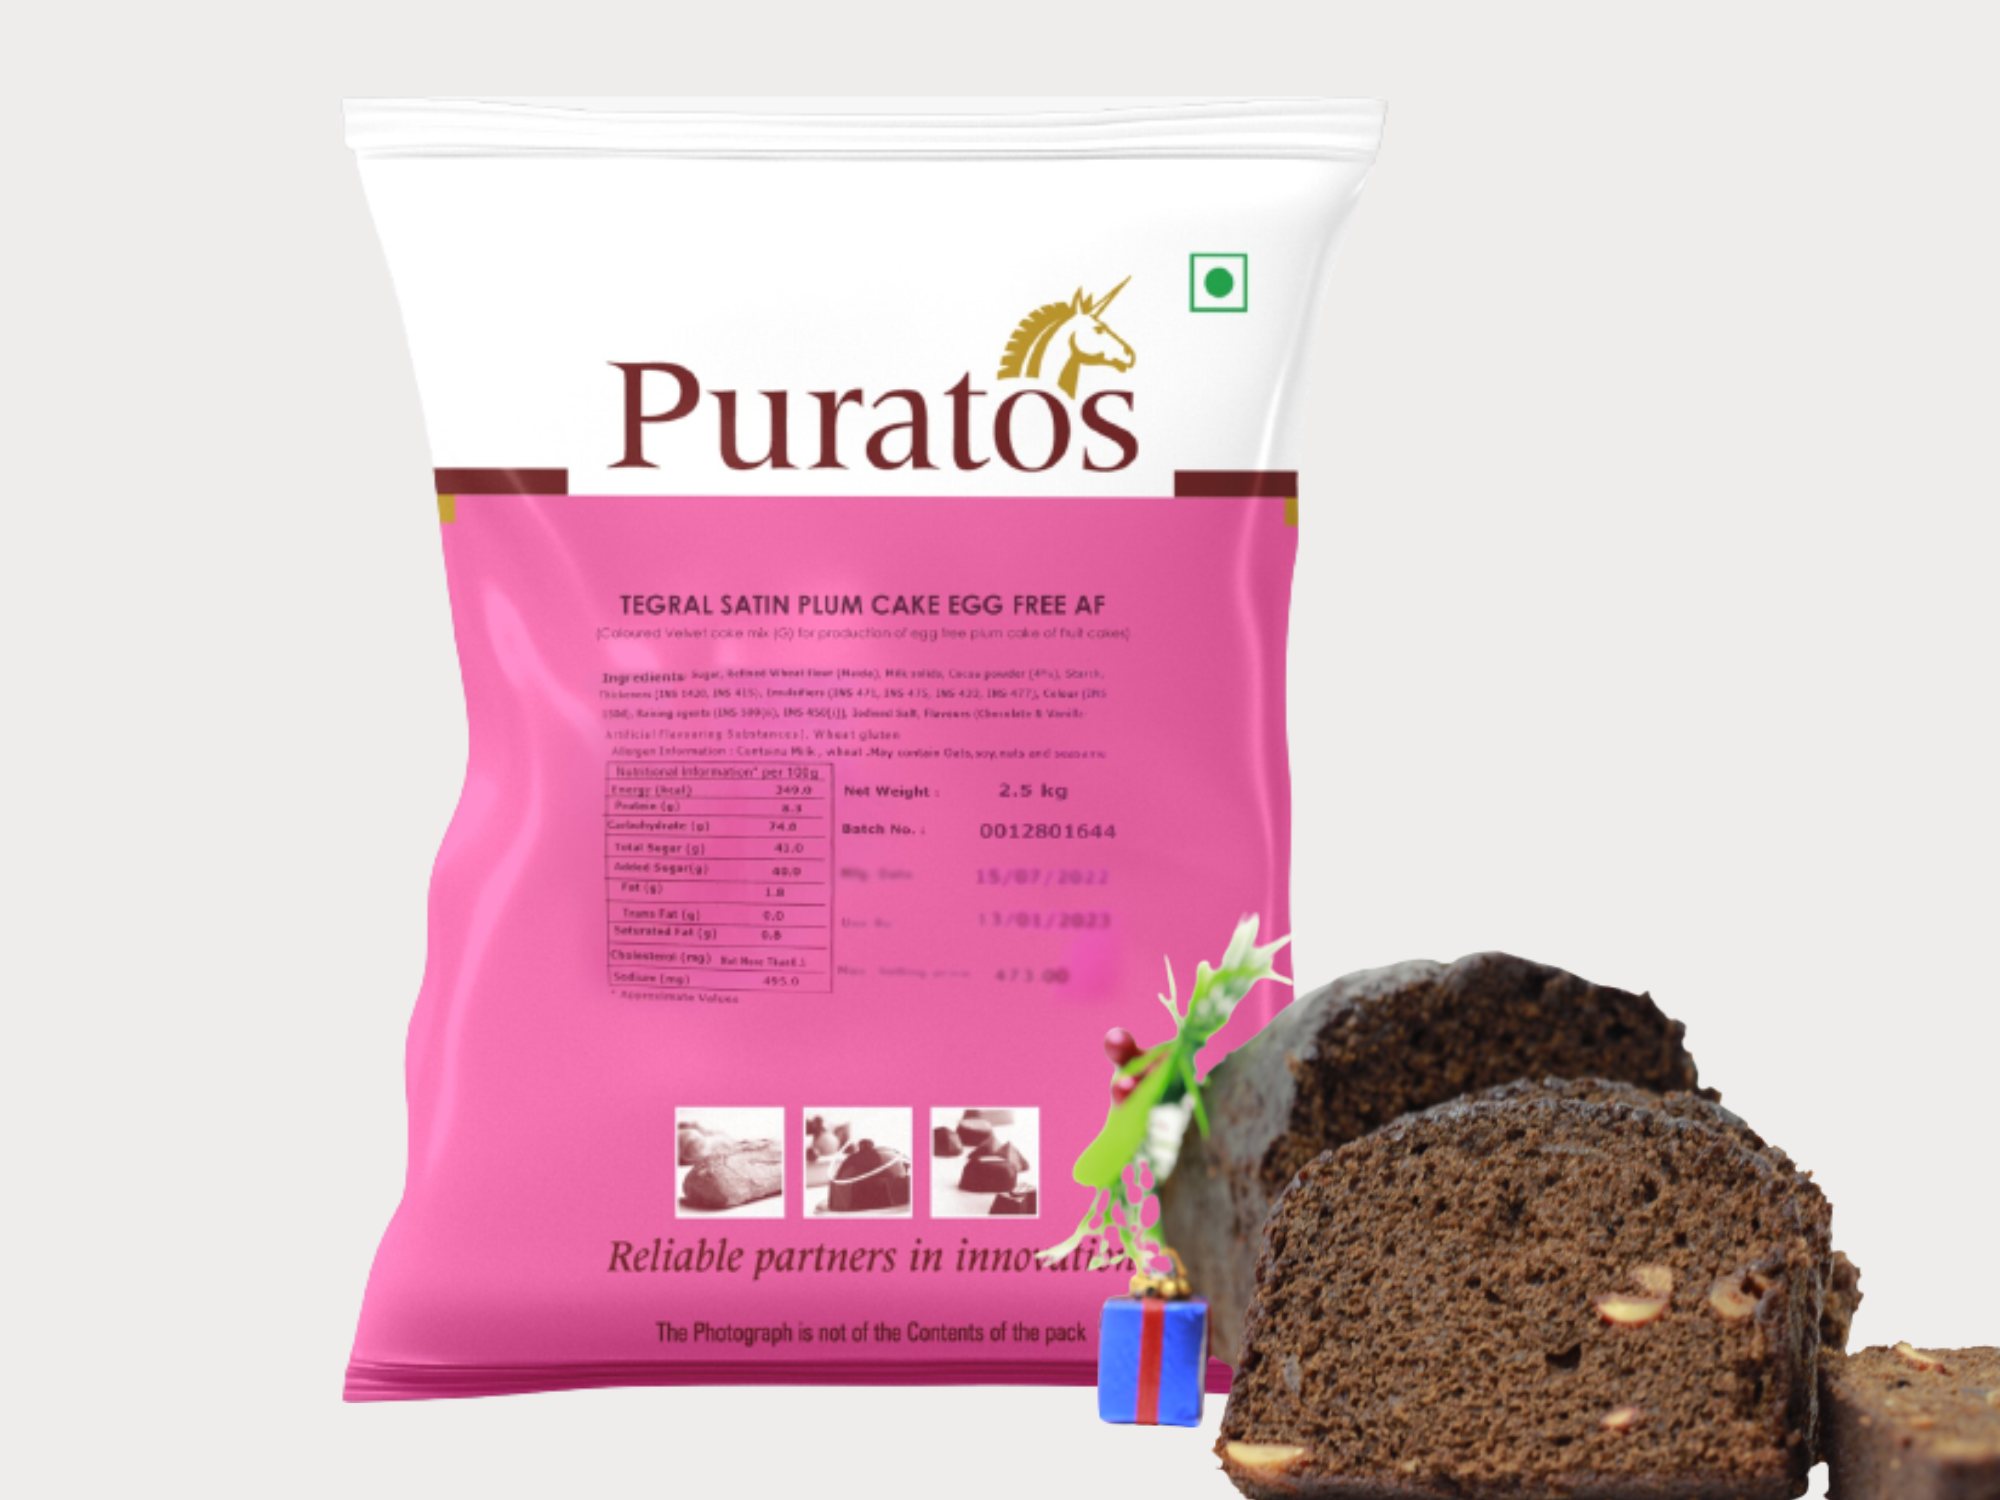 Puratos Tegral Satin Plum cake egg-free offers a one-stop solution for bakers